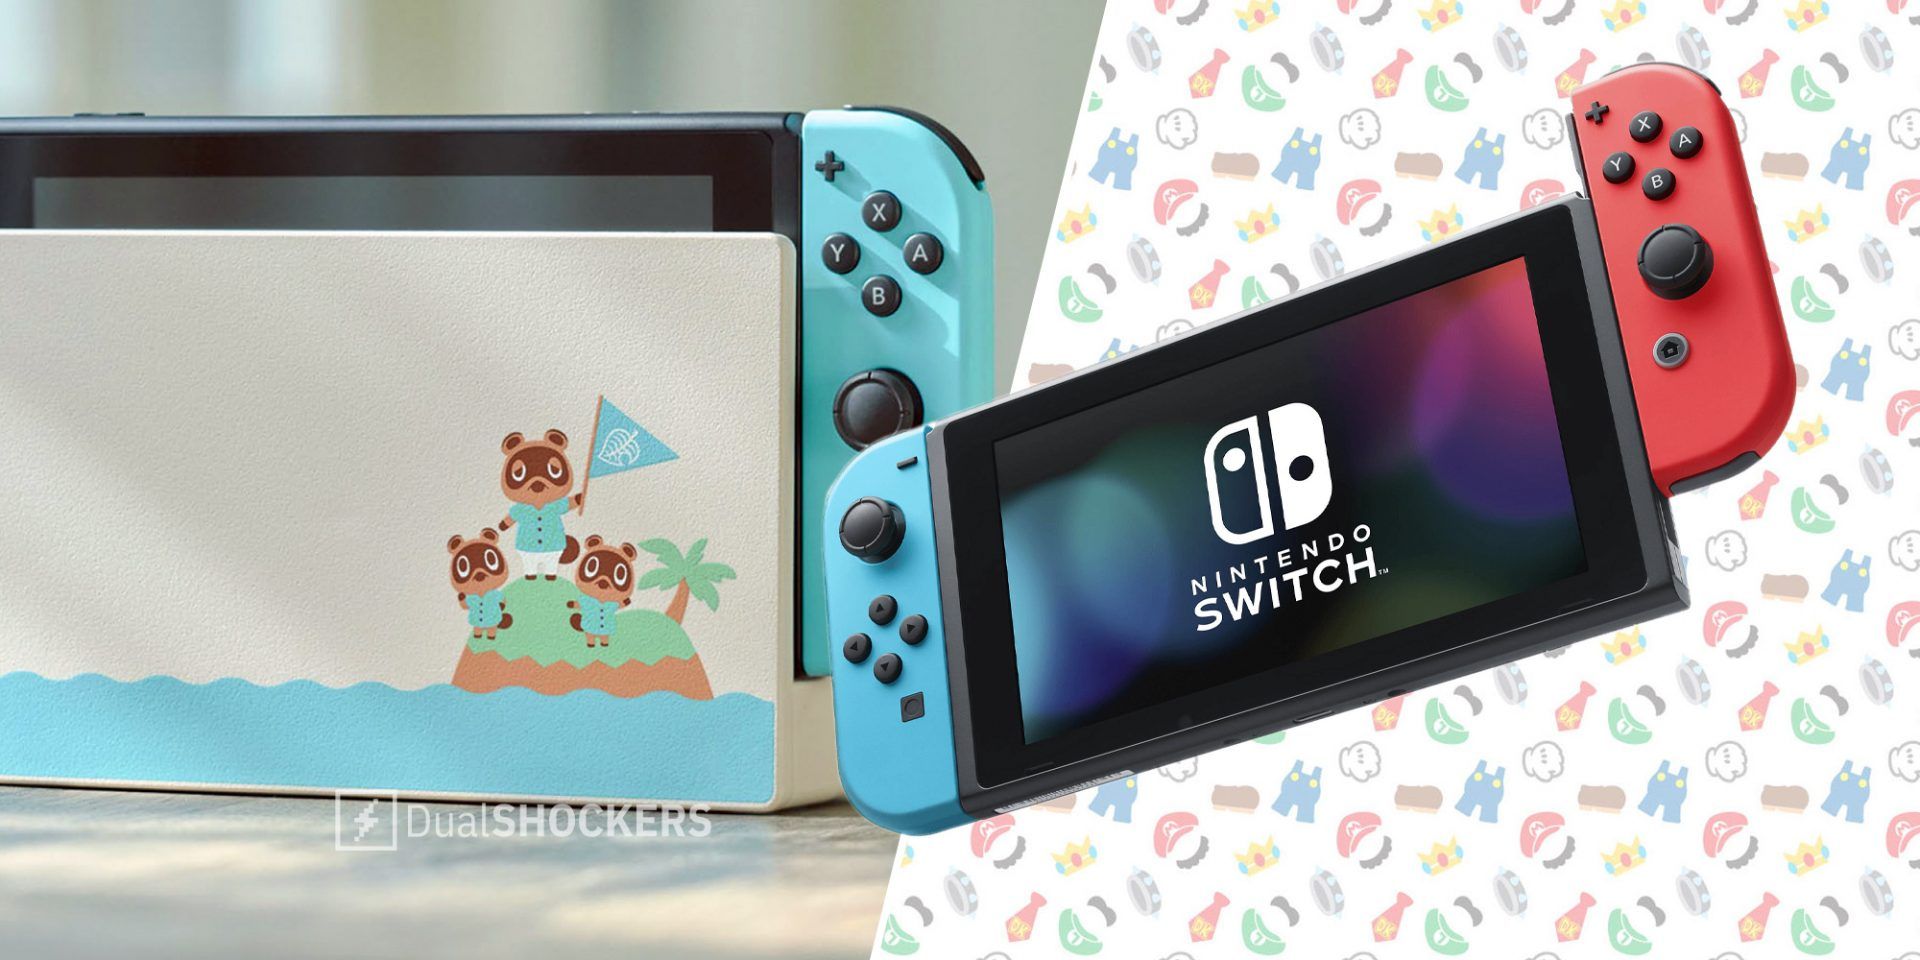 Nintendo Switch Animal Crossing special edition on left, Nintendo Switch with red and blue joycon on right